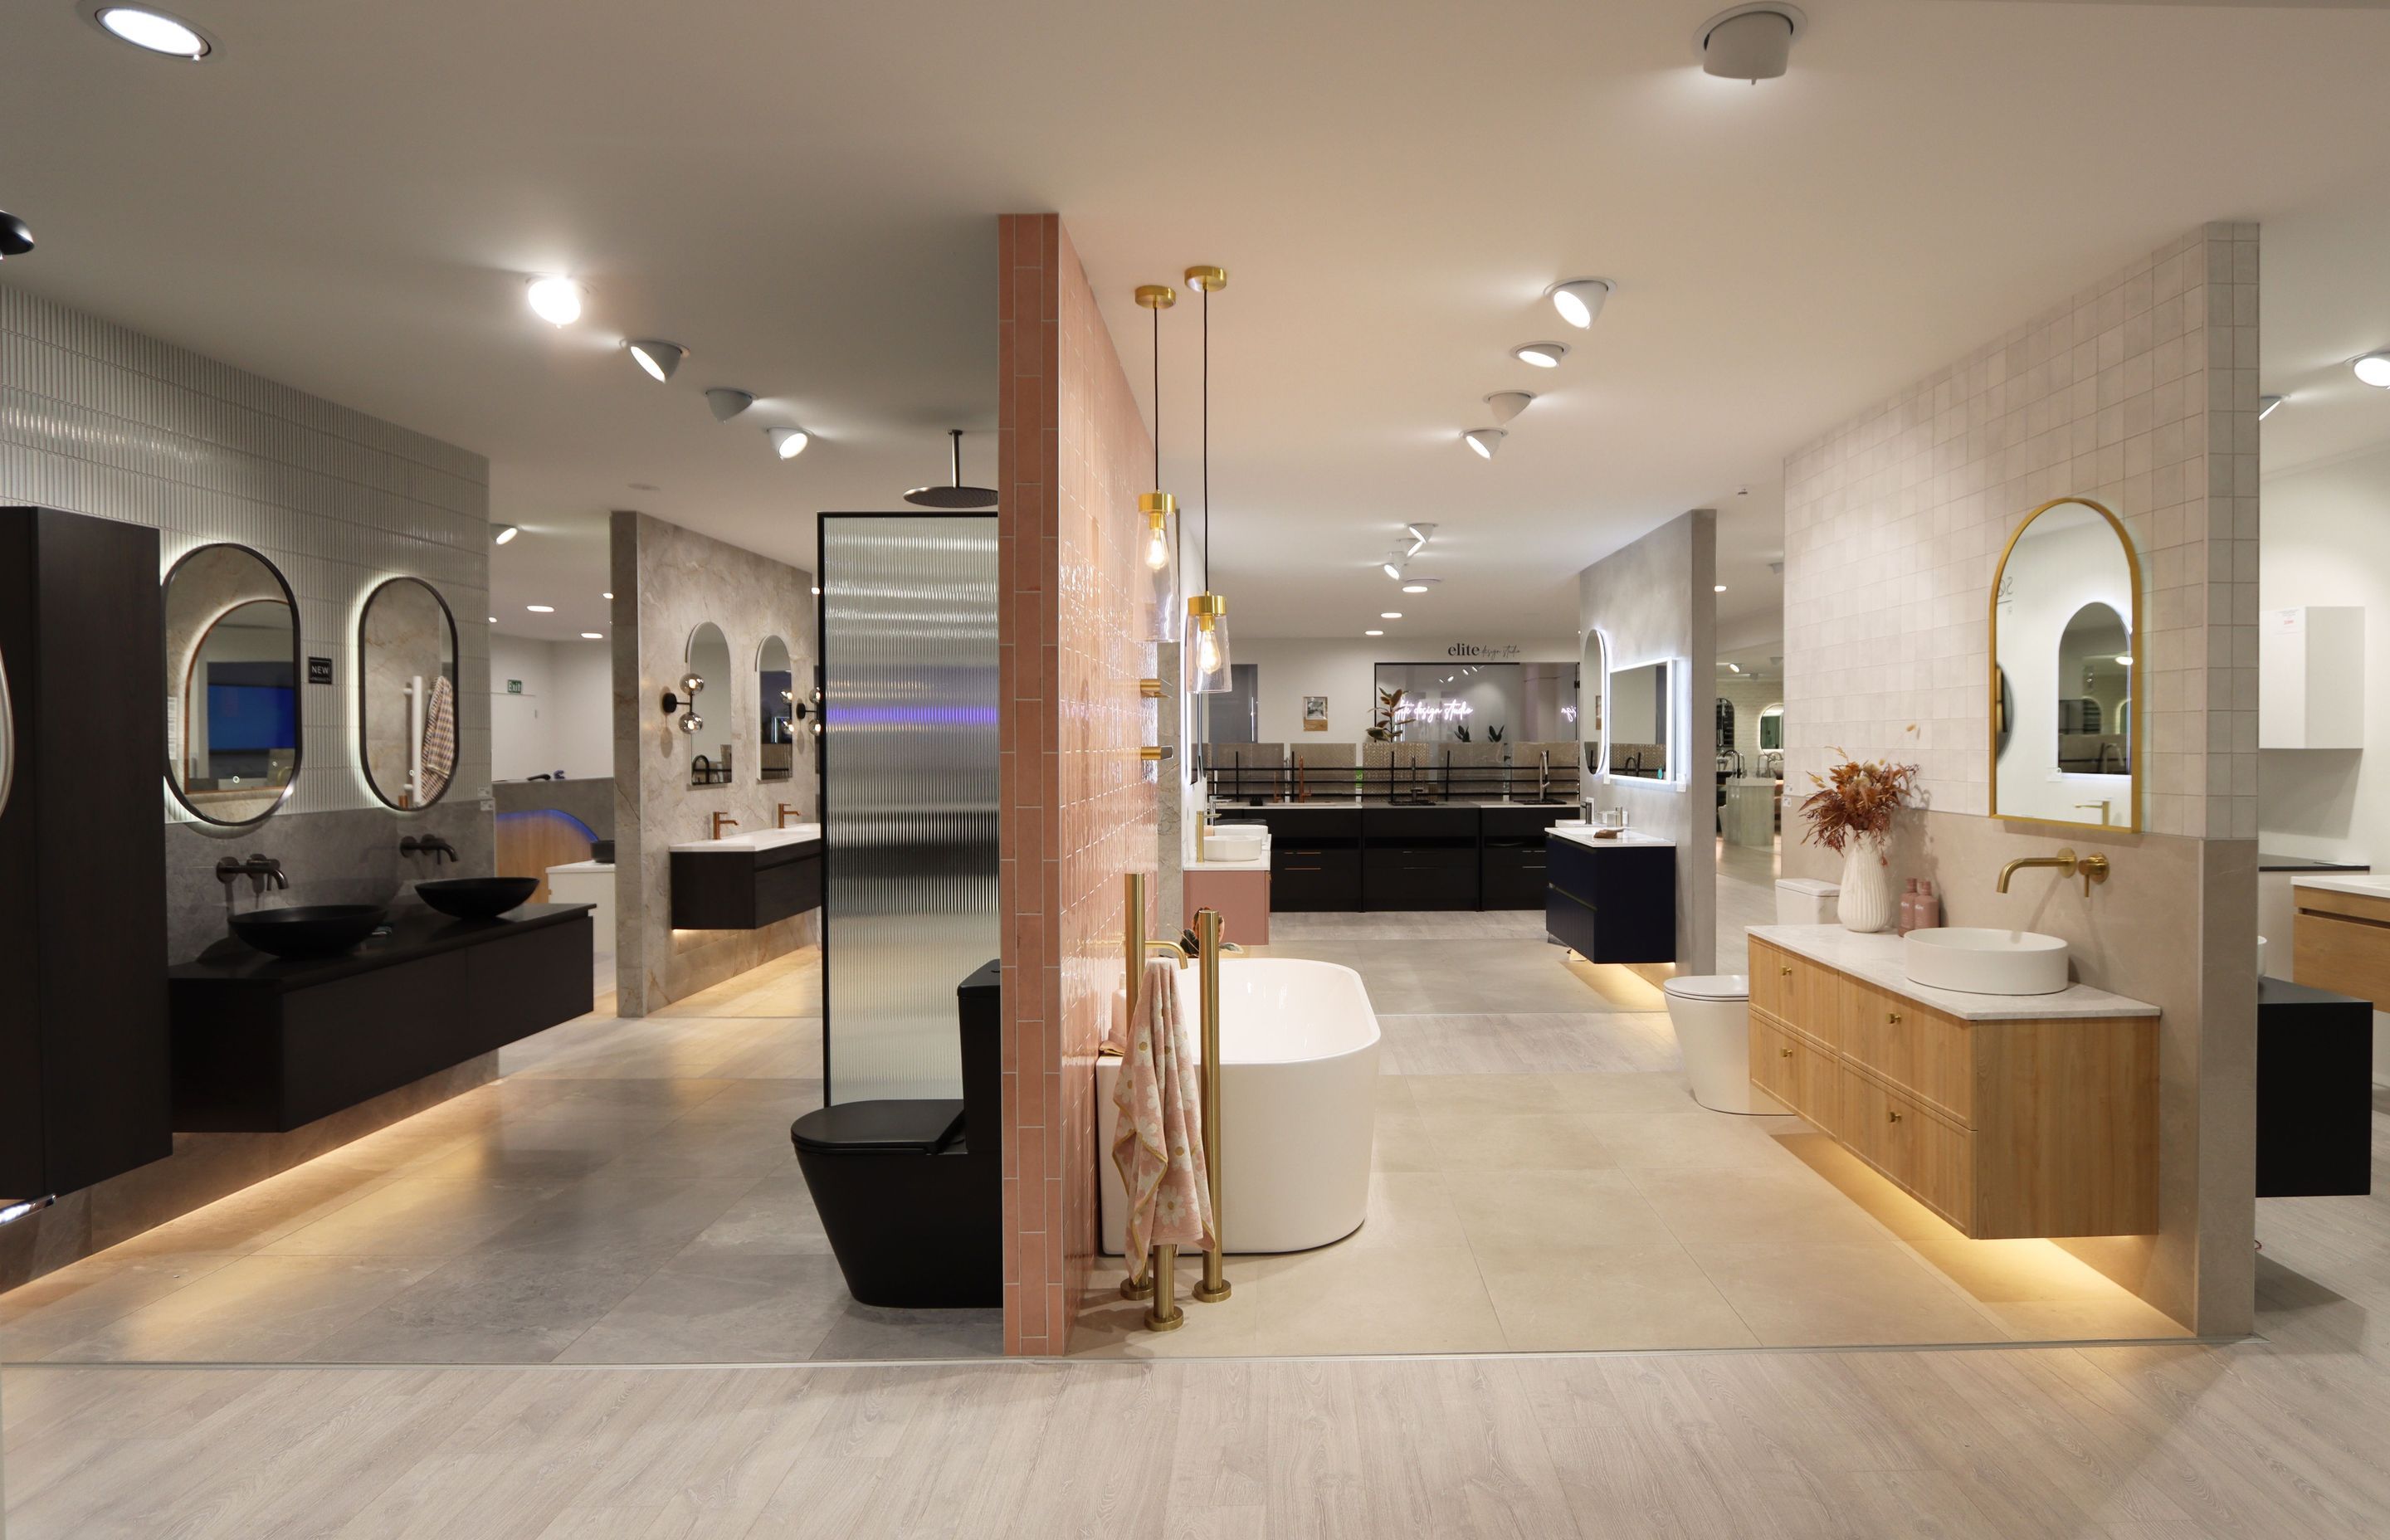 Elite Bathroomware's showroom with the new design studio in the background.